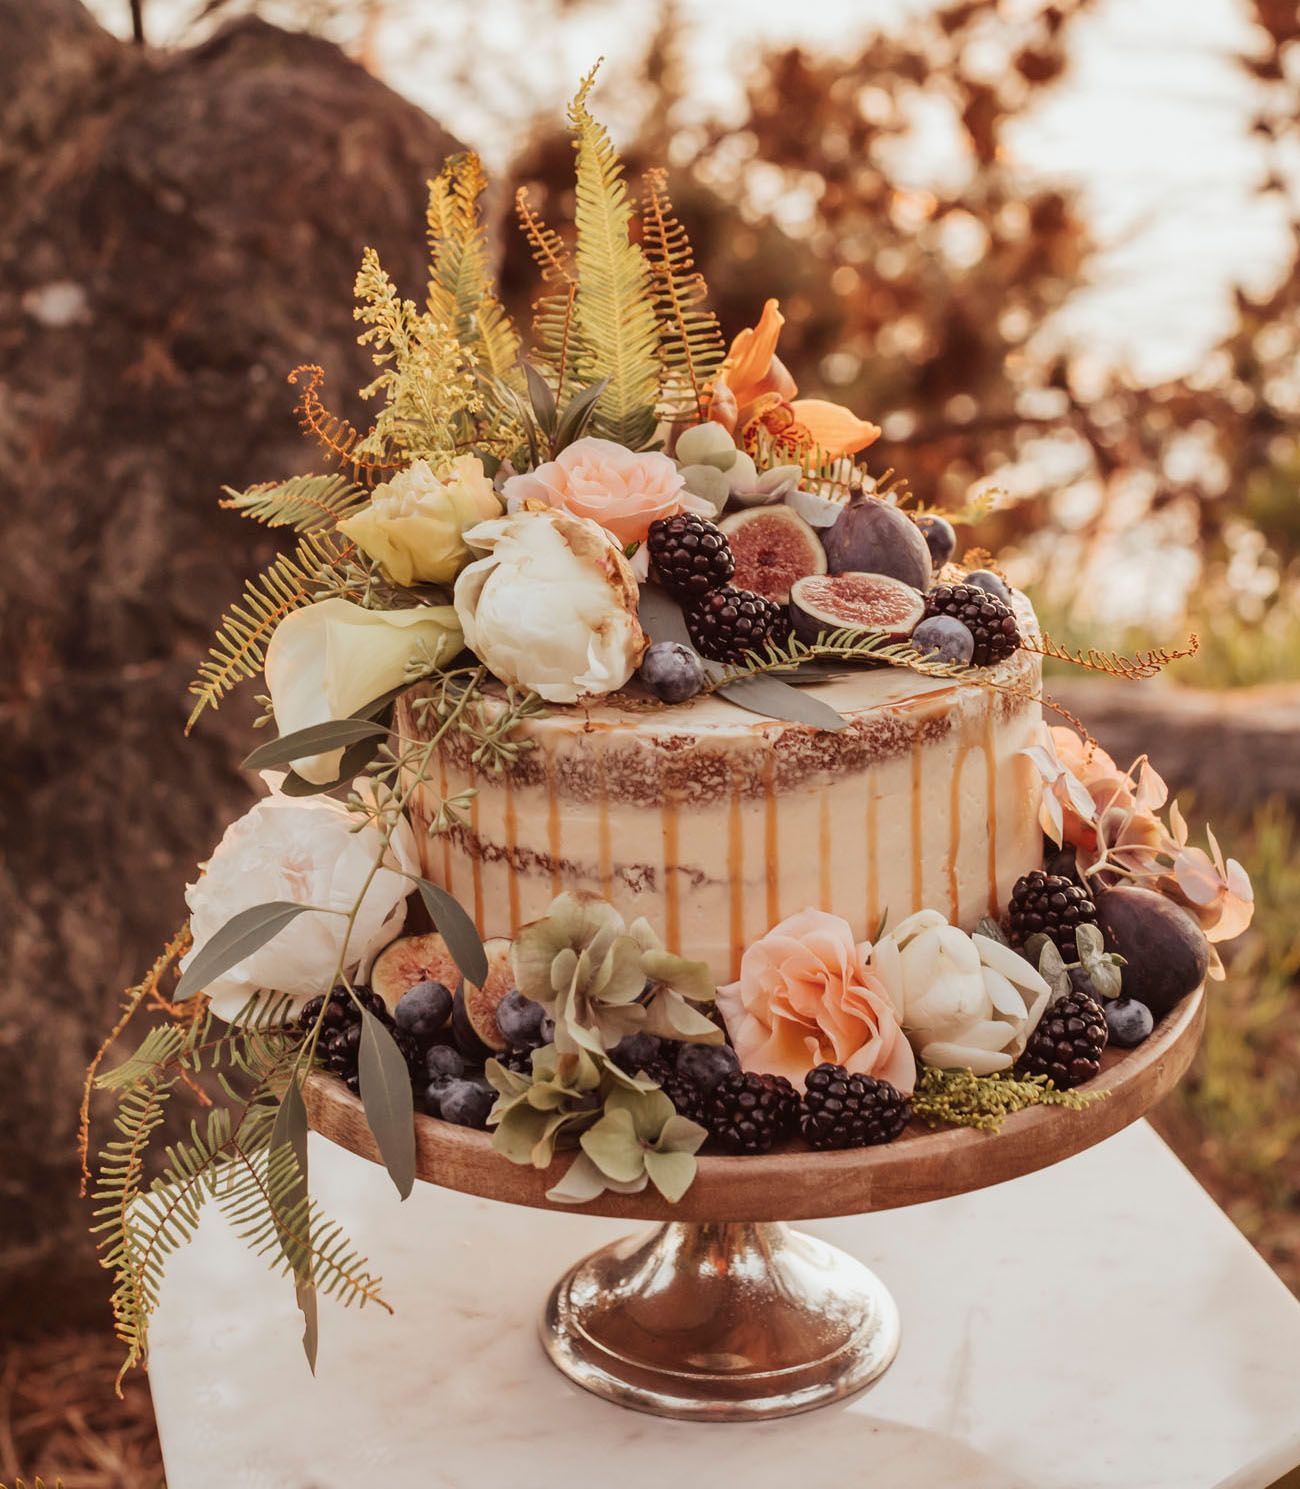 A Big Sur Dream: Whimsical + Bohemian Forest Elopement with Tons of Macram? Accents -   12 cake Drip fresh fruit
 ideas